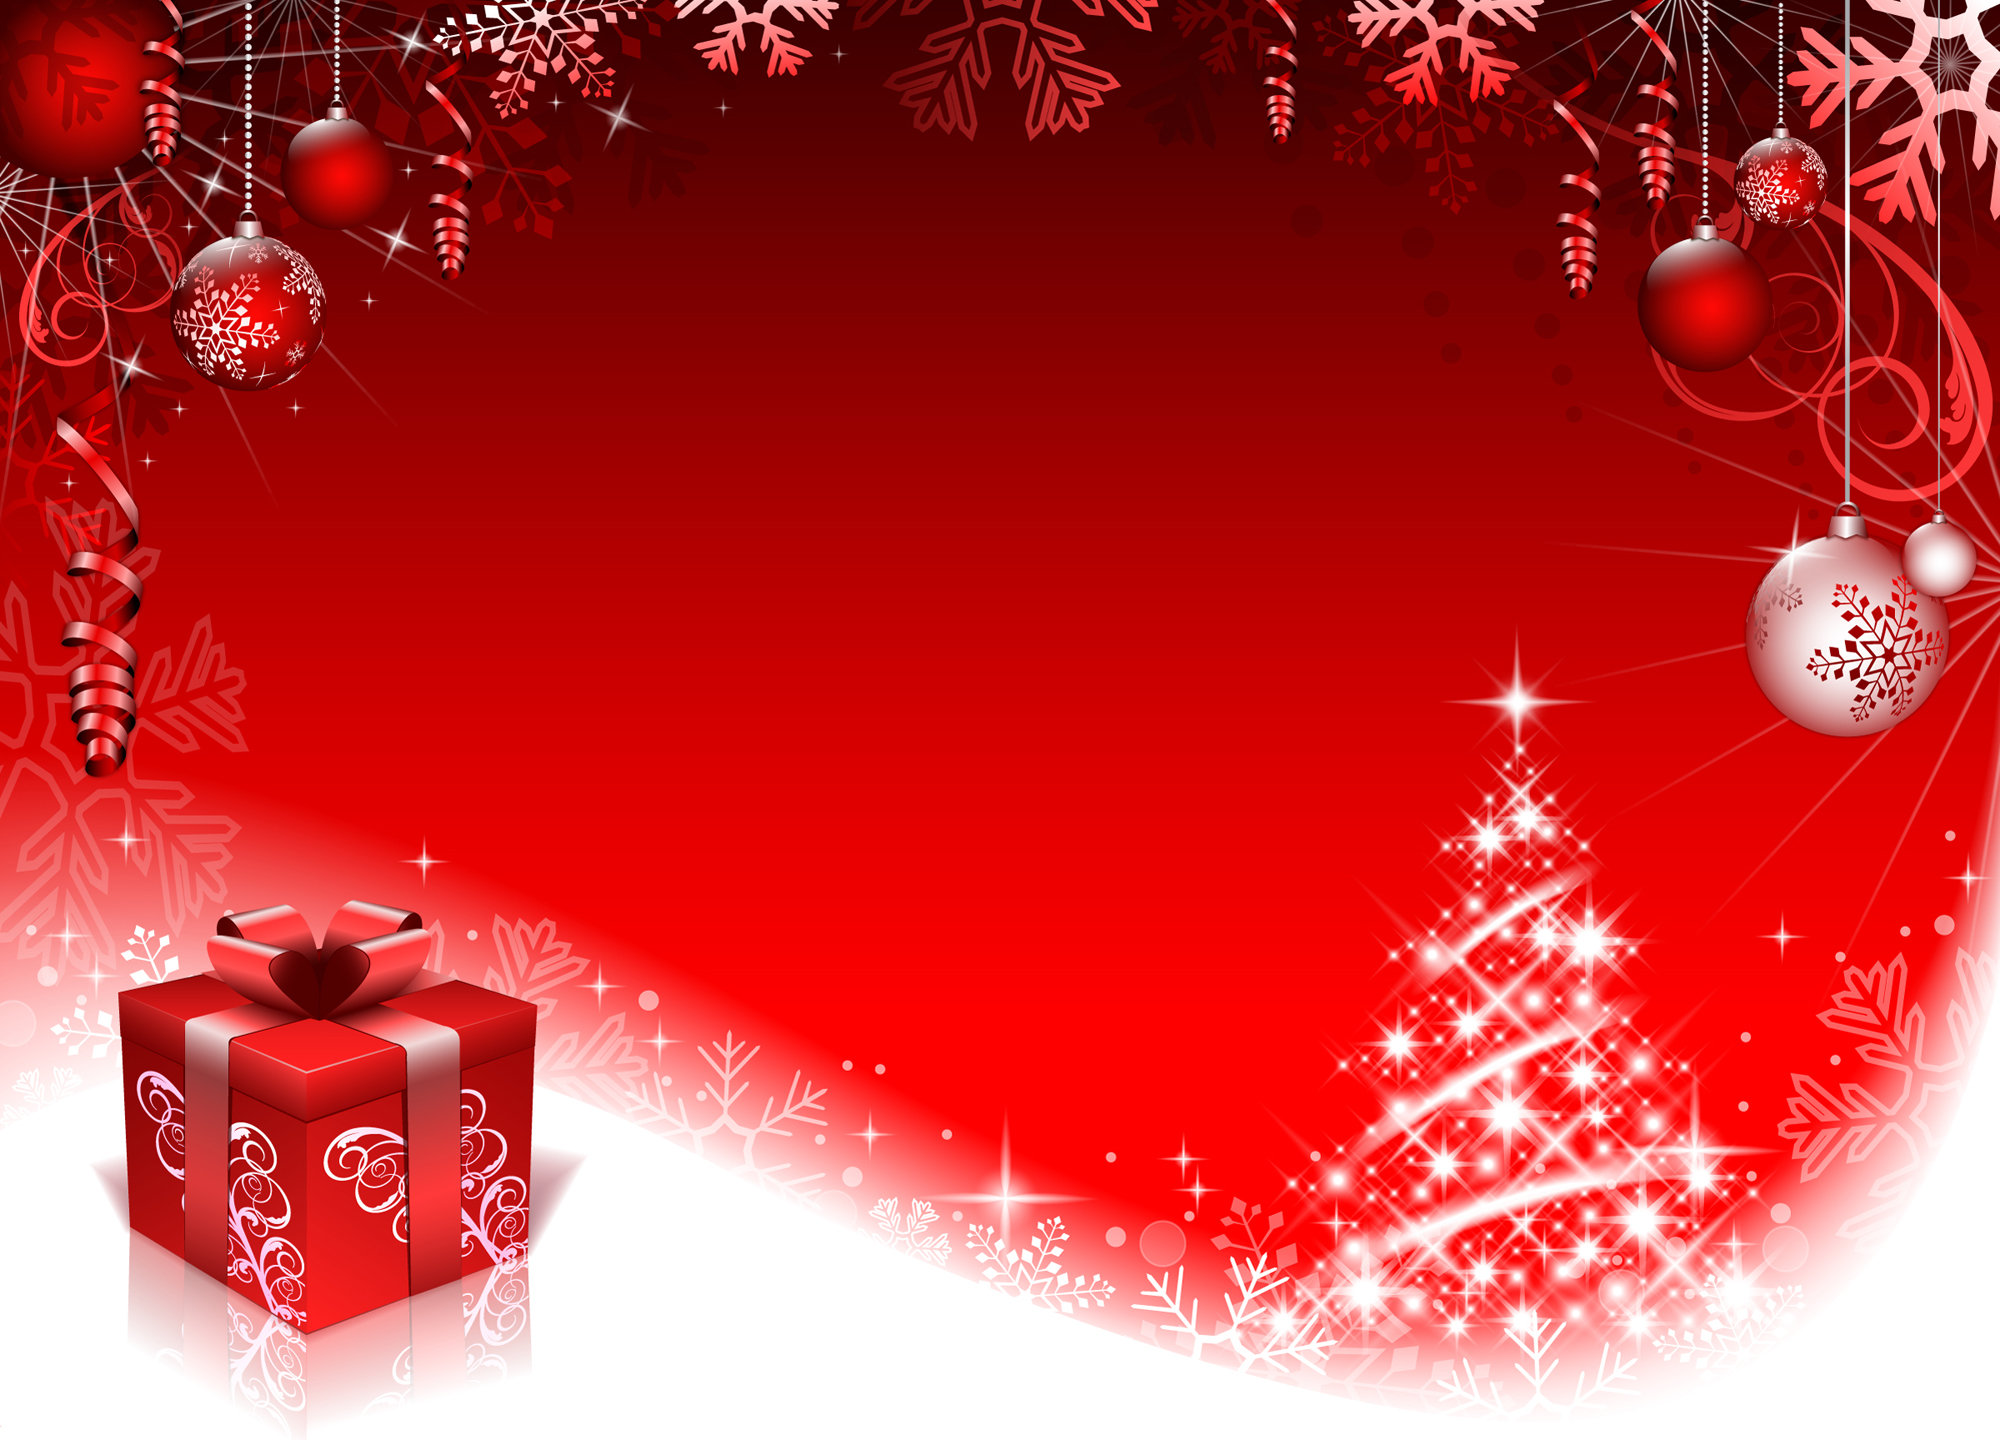 Christmas Backgrounds for Photoshop Wallpapers9